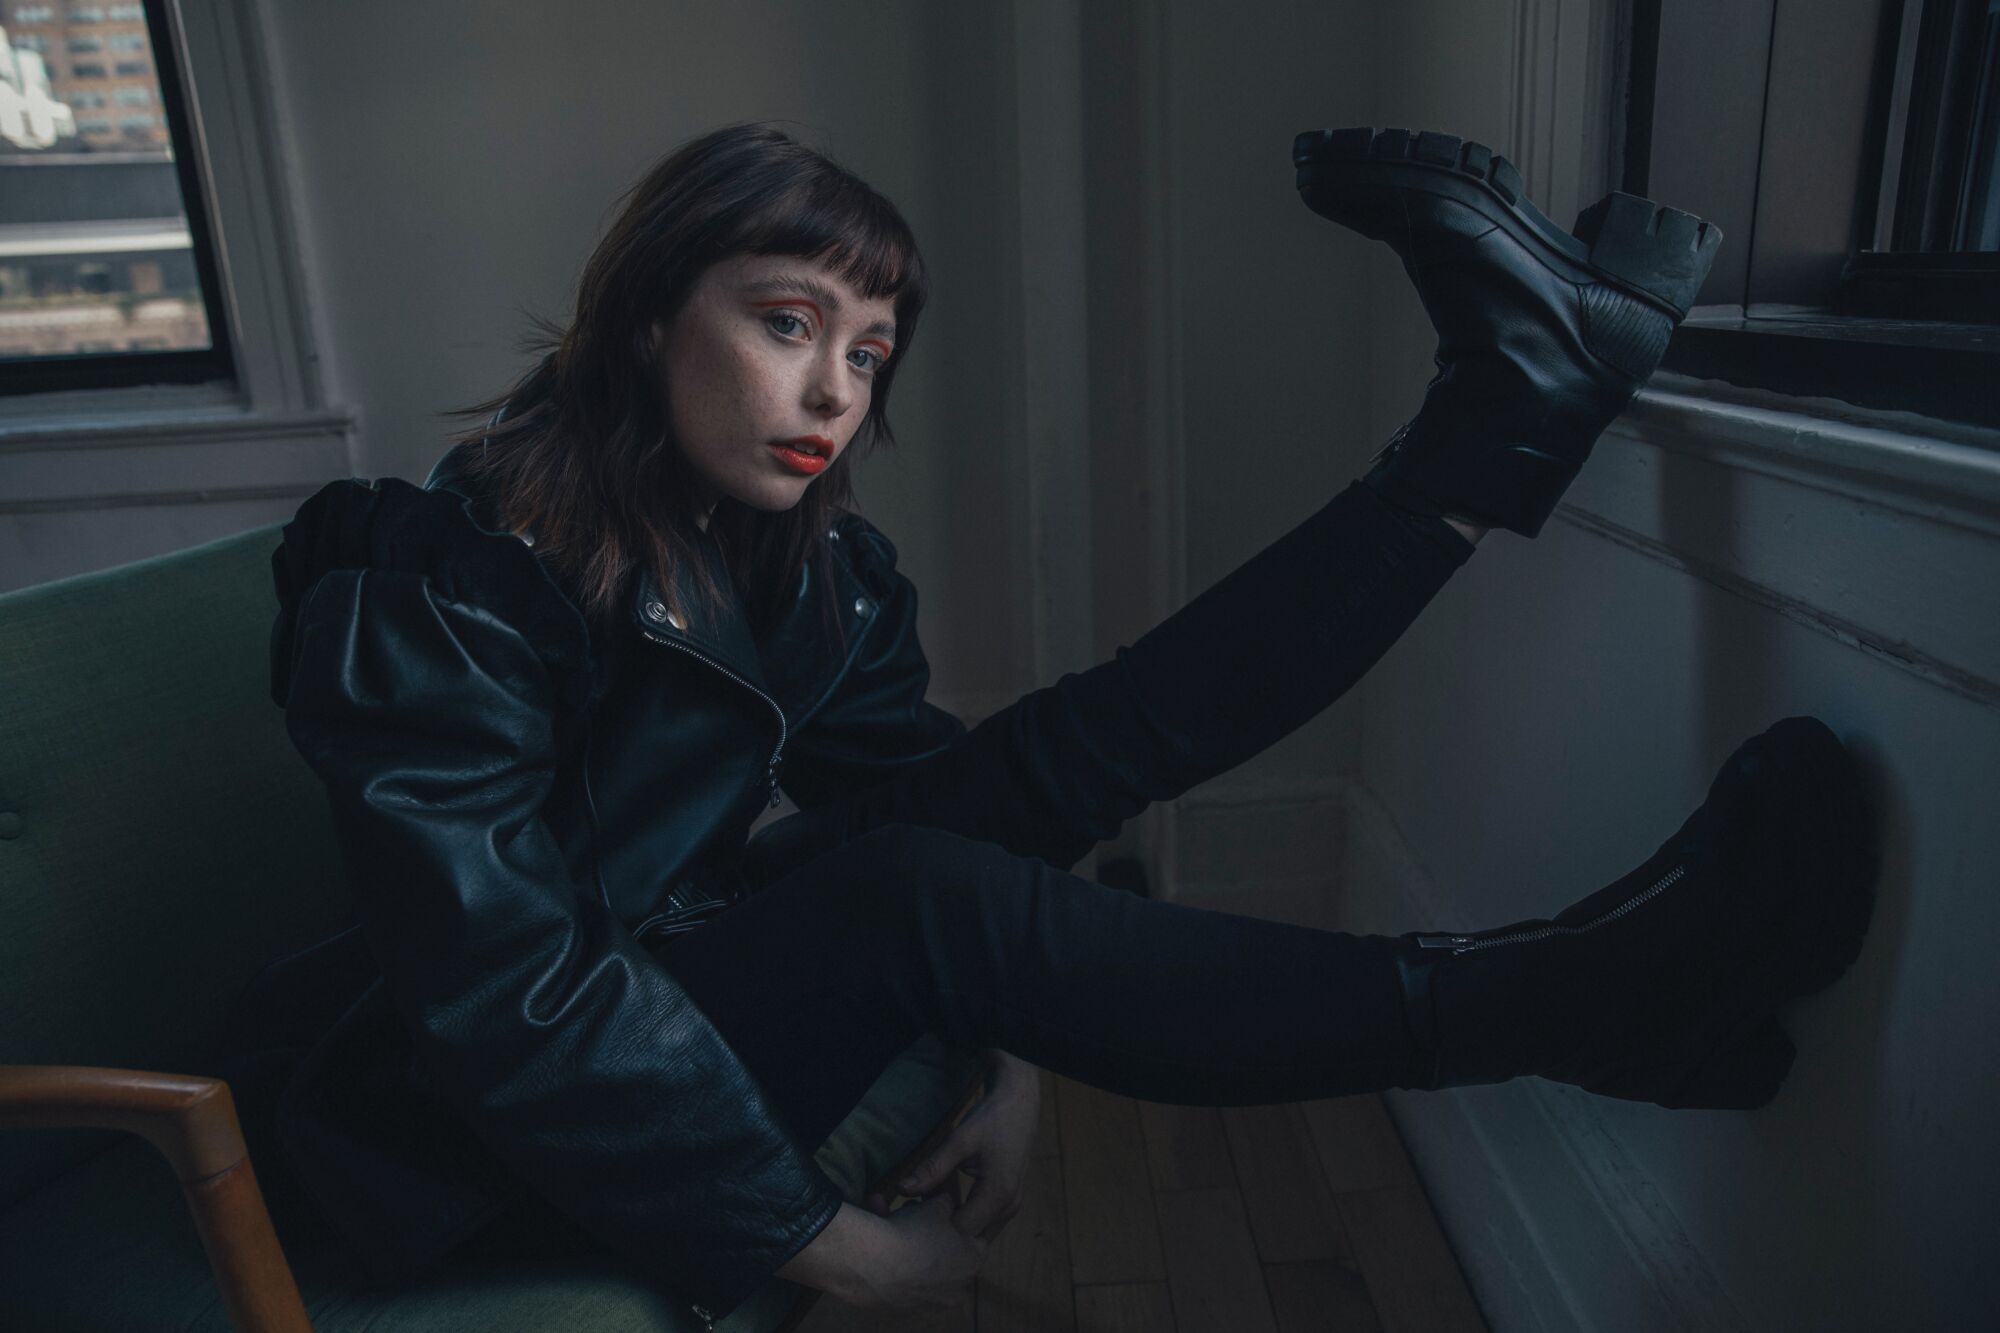 A woman in a leather jacket sits on a chair with her combat boots propped up on a wall.